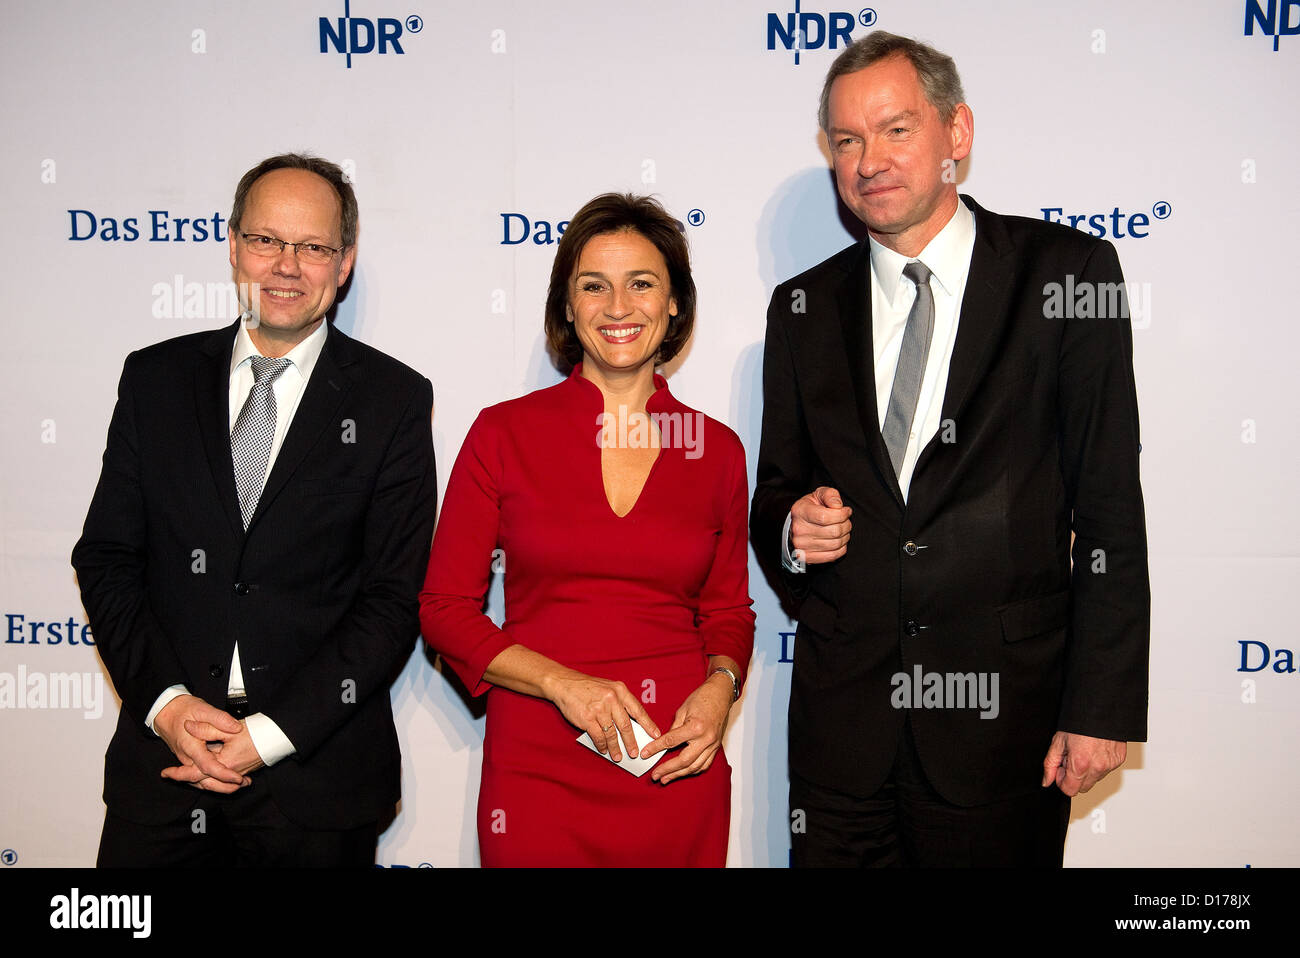 Kai Gniffke (L-R), 'Tagesschau' chief editor, TV host Sandra Maischberger and NDR director Lutz Marmor pose at the news show's 60th anniversary party at Cruise Center in Hamburg, Germany, 06 December 2012. Photo: Axel Heimken Stock Photo